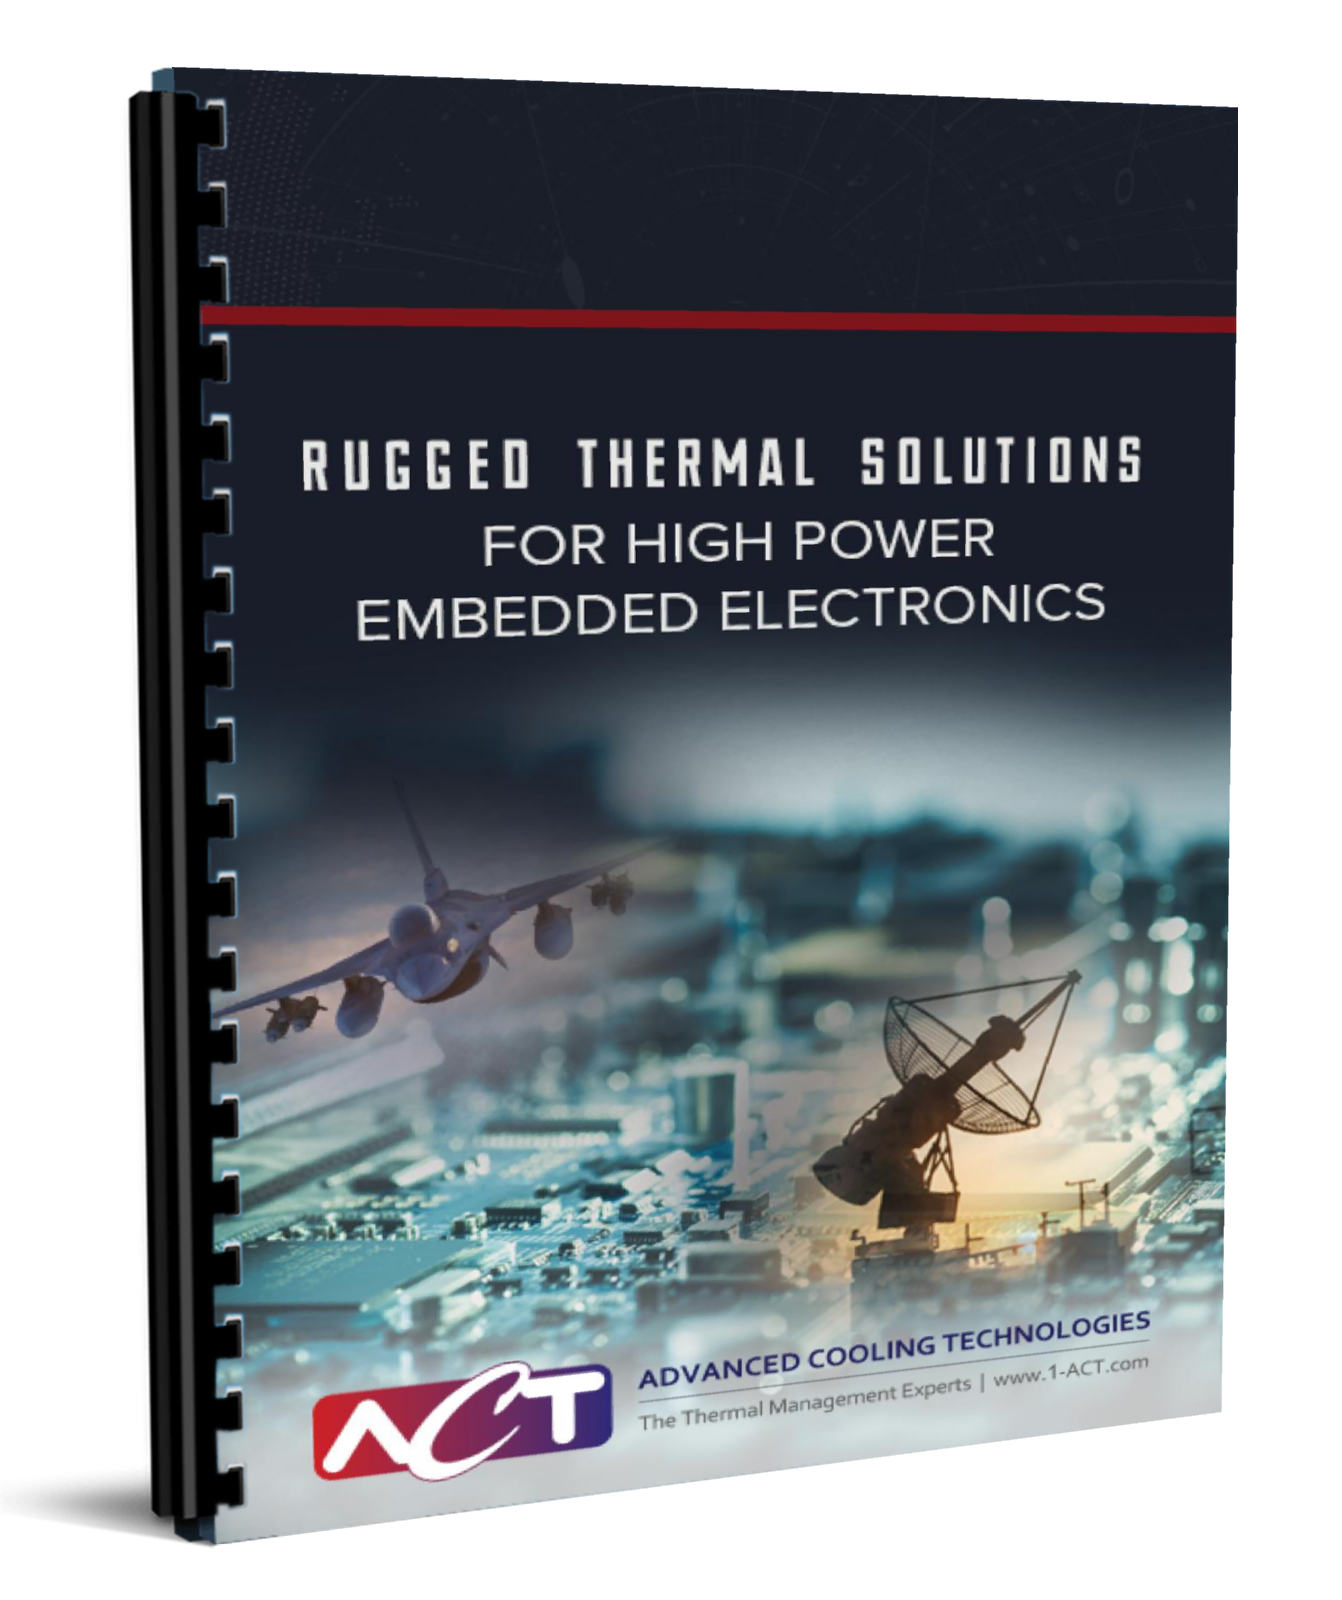 Rugged Thermal Solutions for High Power Embedded Electronics eBook